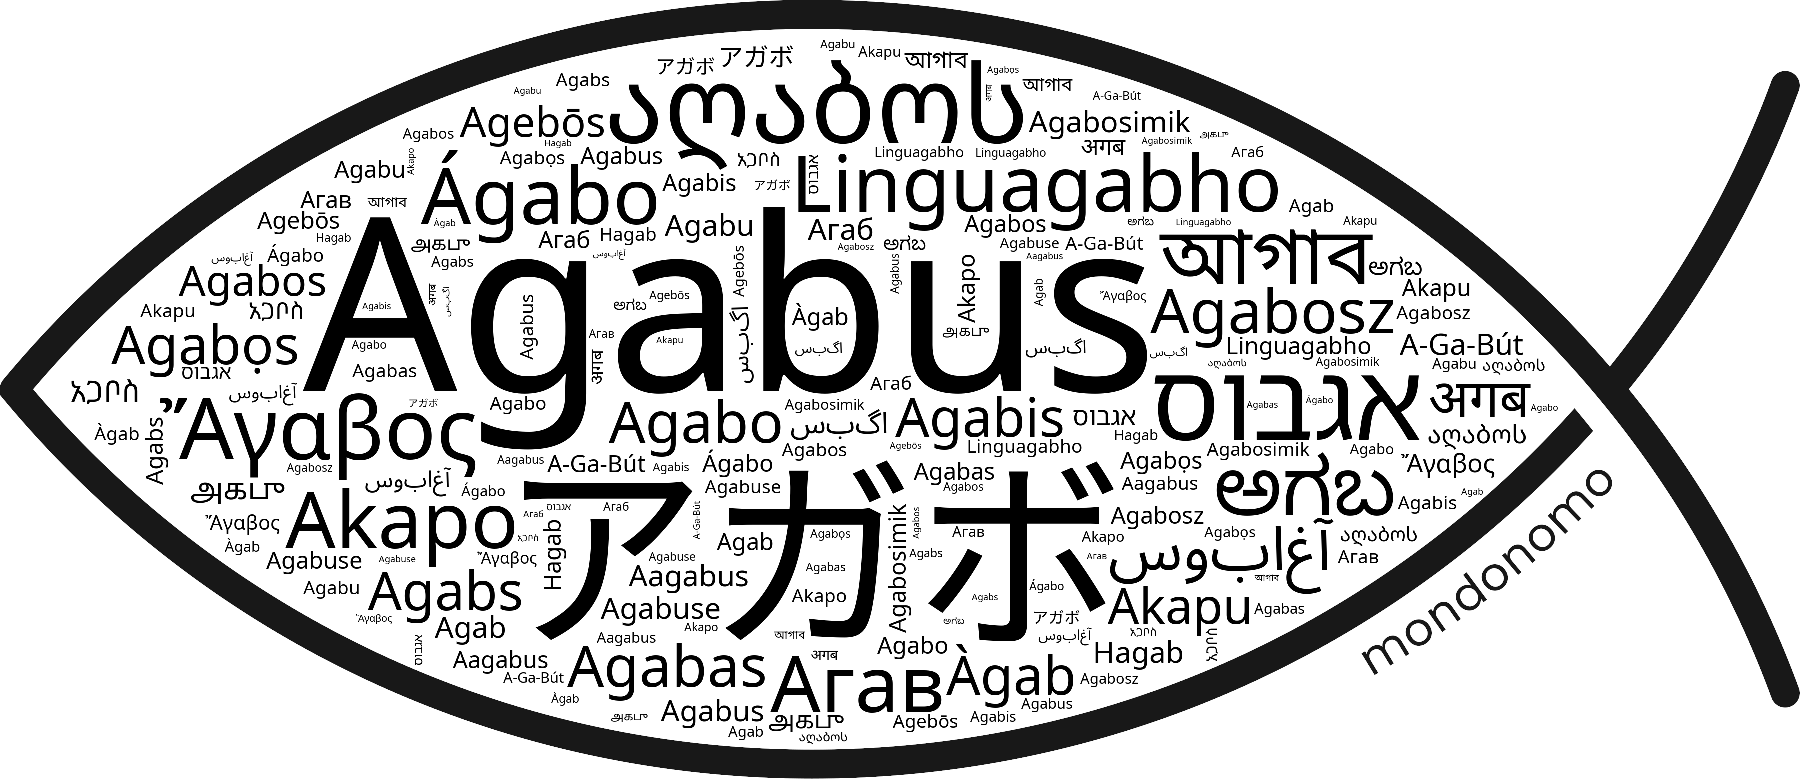 Name Agabus in the world's Bibles